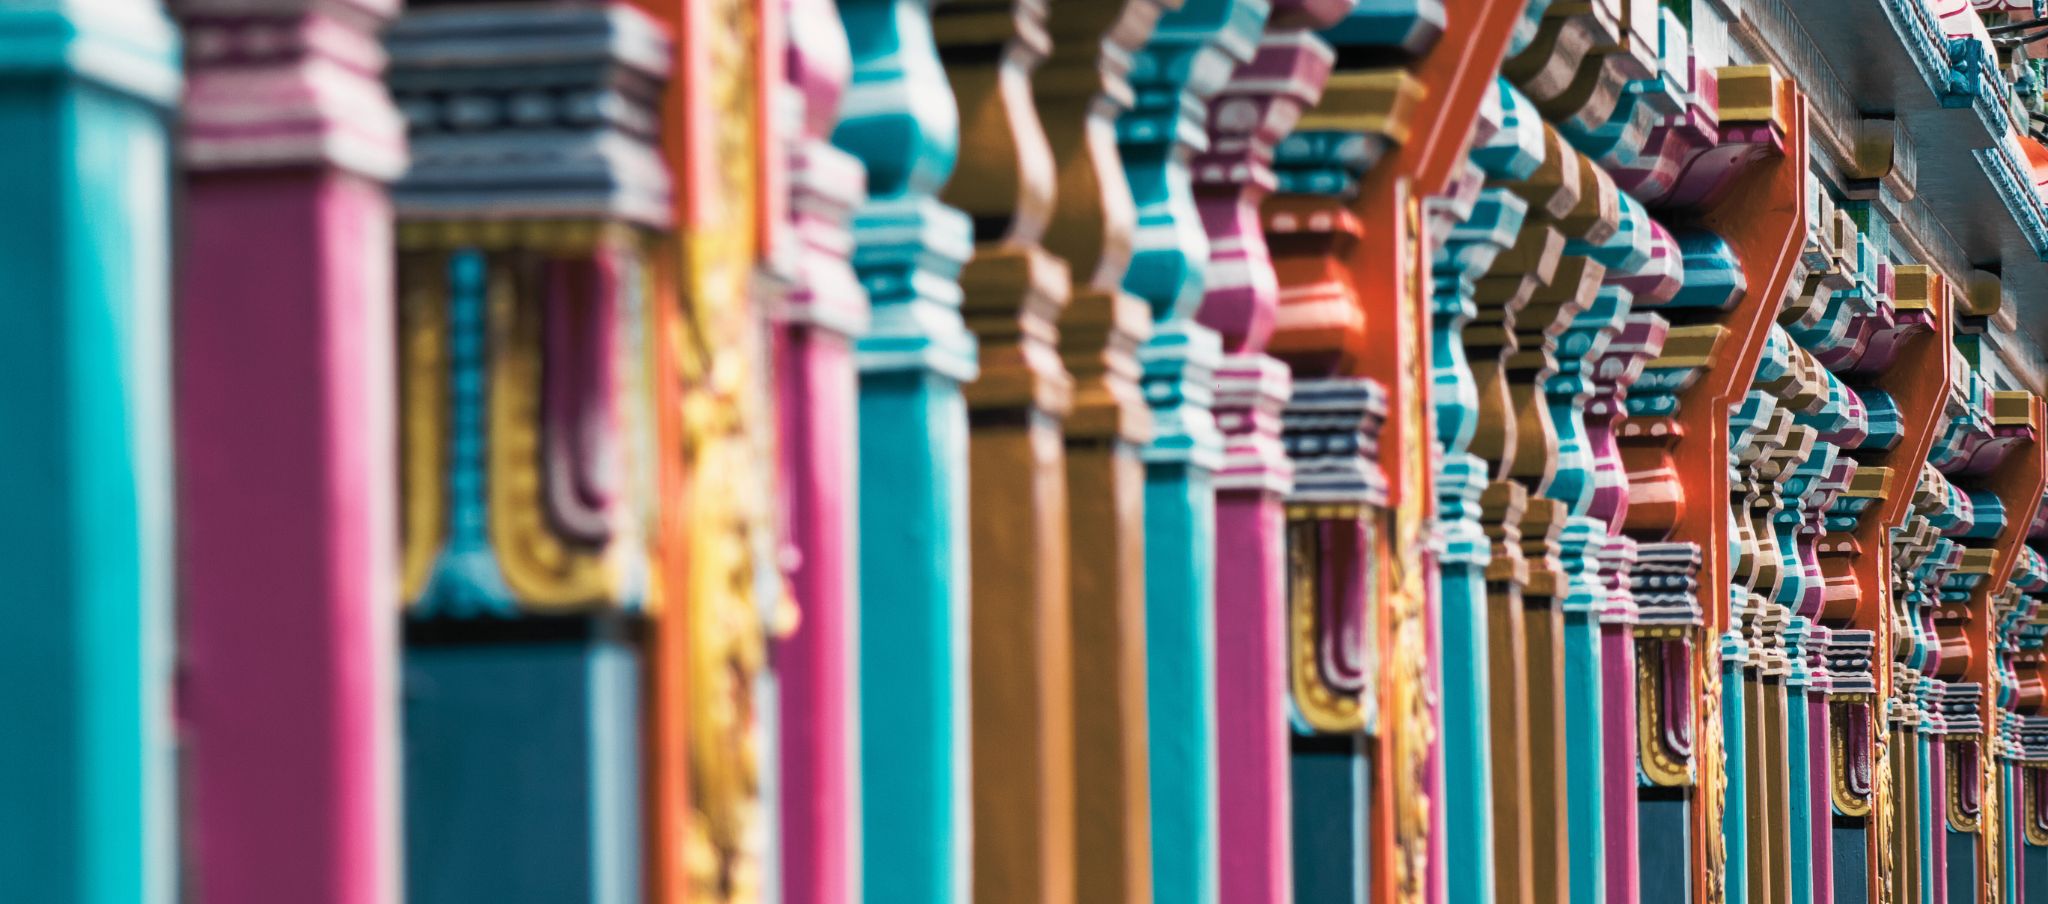 A row of colorfully painted wooden pillars